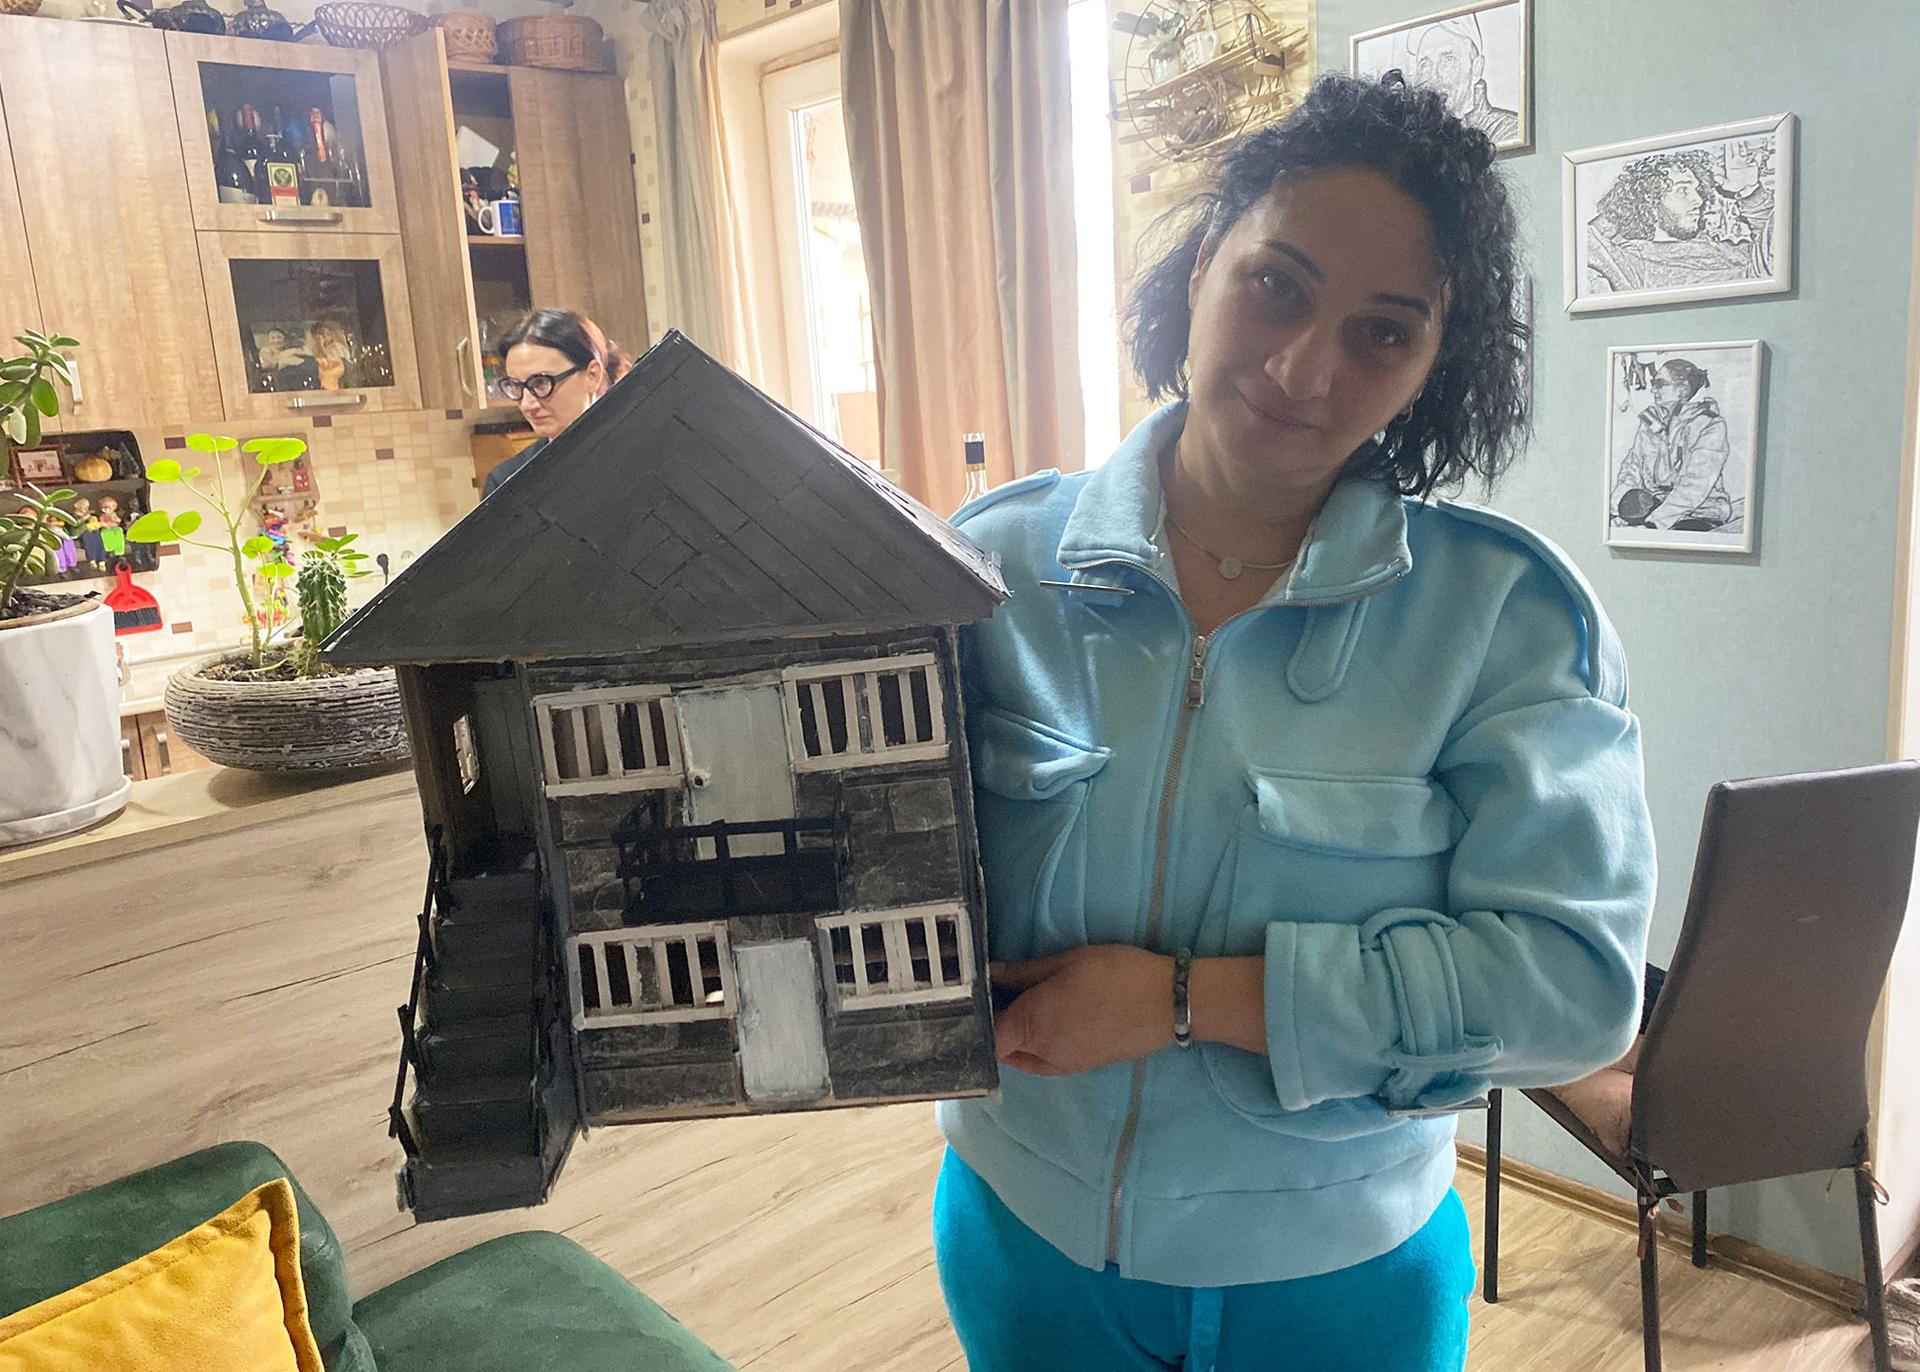 Irina Kotua stands with a model of the house where she used to live in Abkhazia before she fled the region in 1993, during a war between Georgia and Abkhaz separatists, who were backed by Russia.